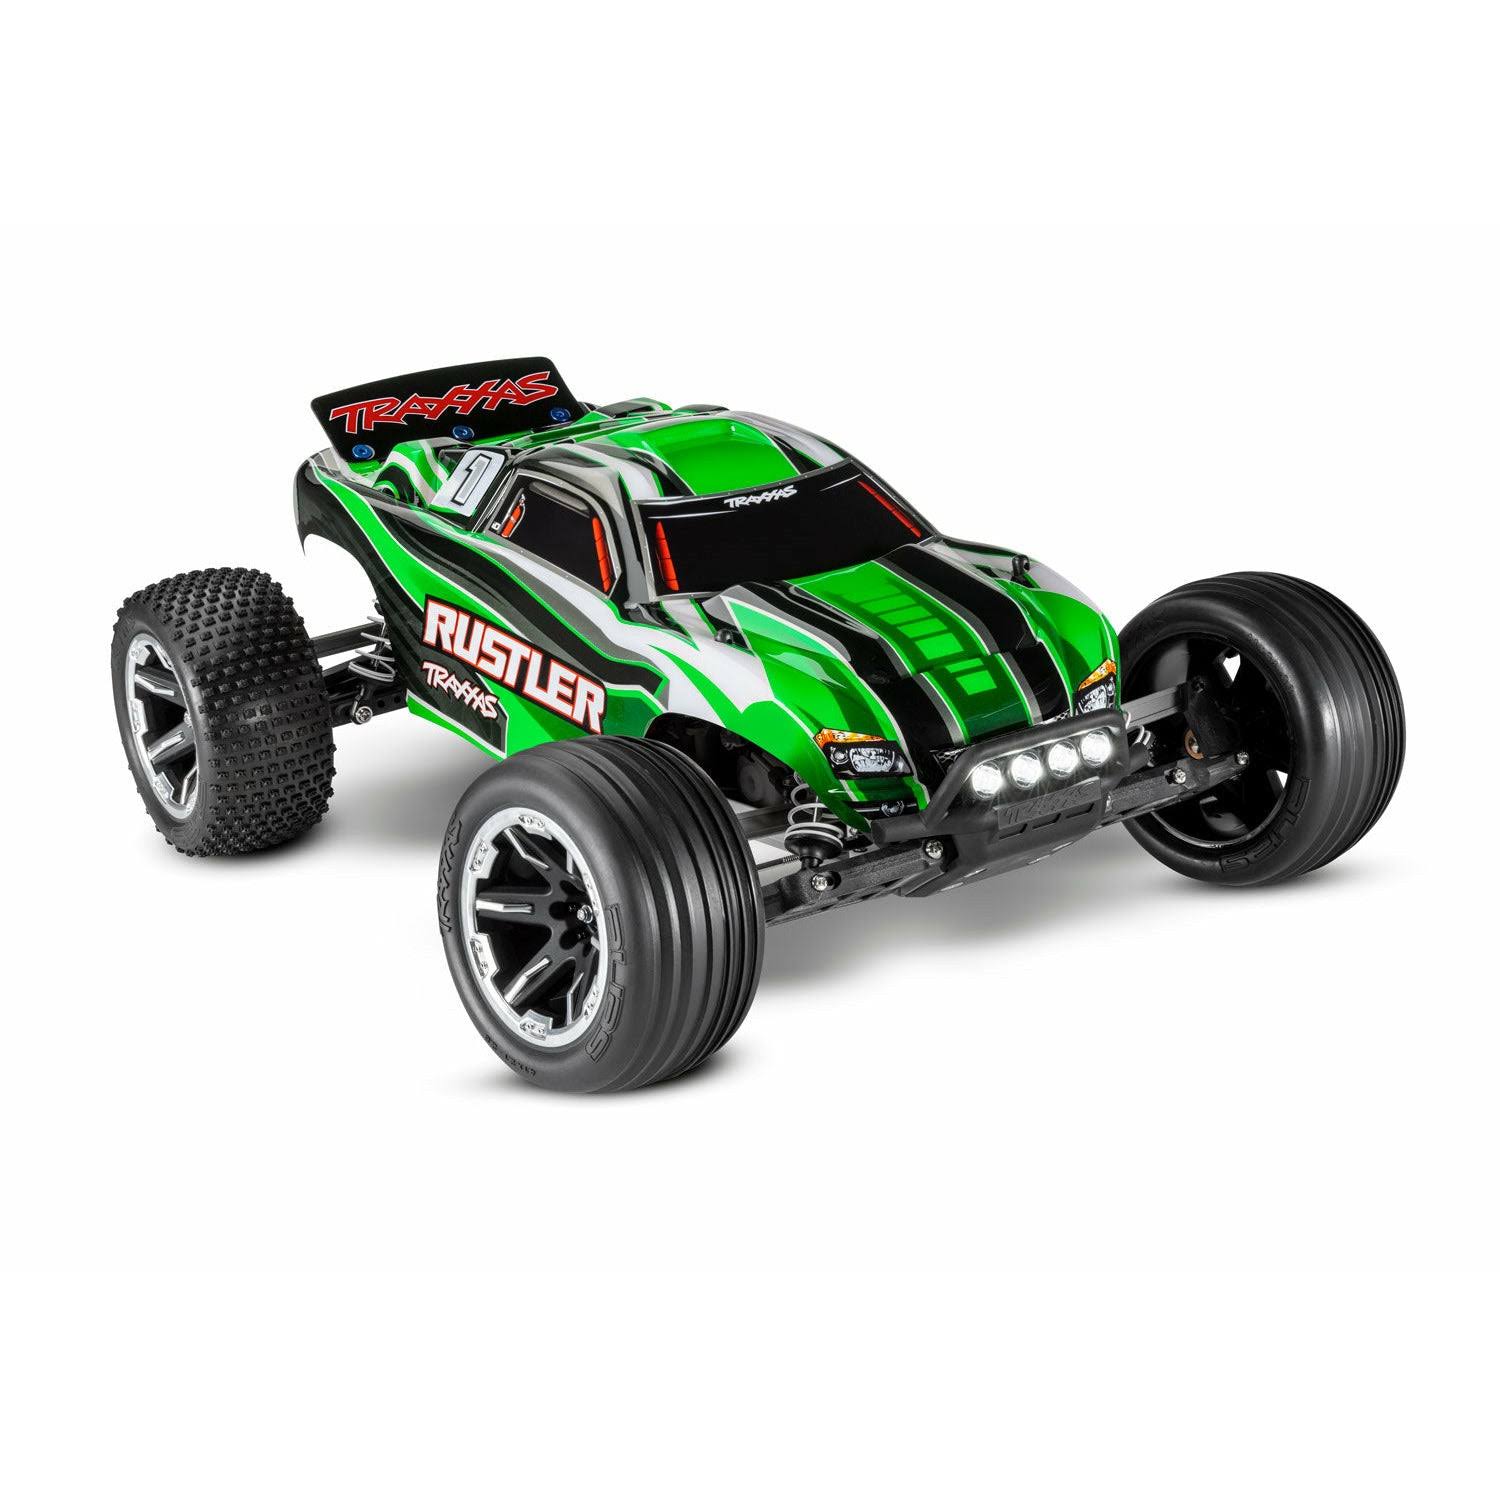 Traxxas 1/10 Rustler 2WD Stadium Truck, RTR With LED Lights